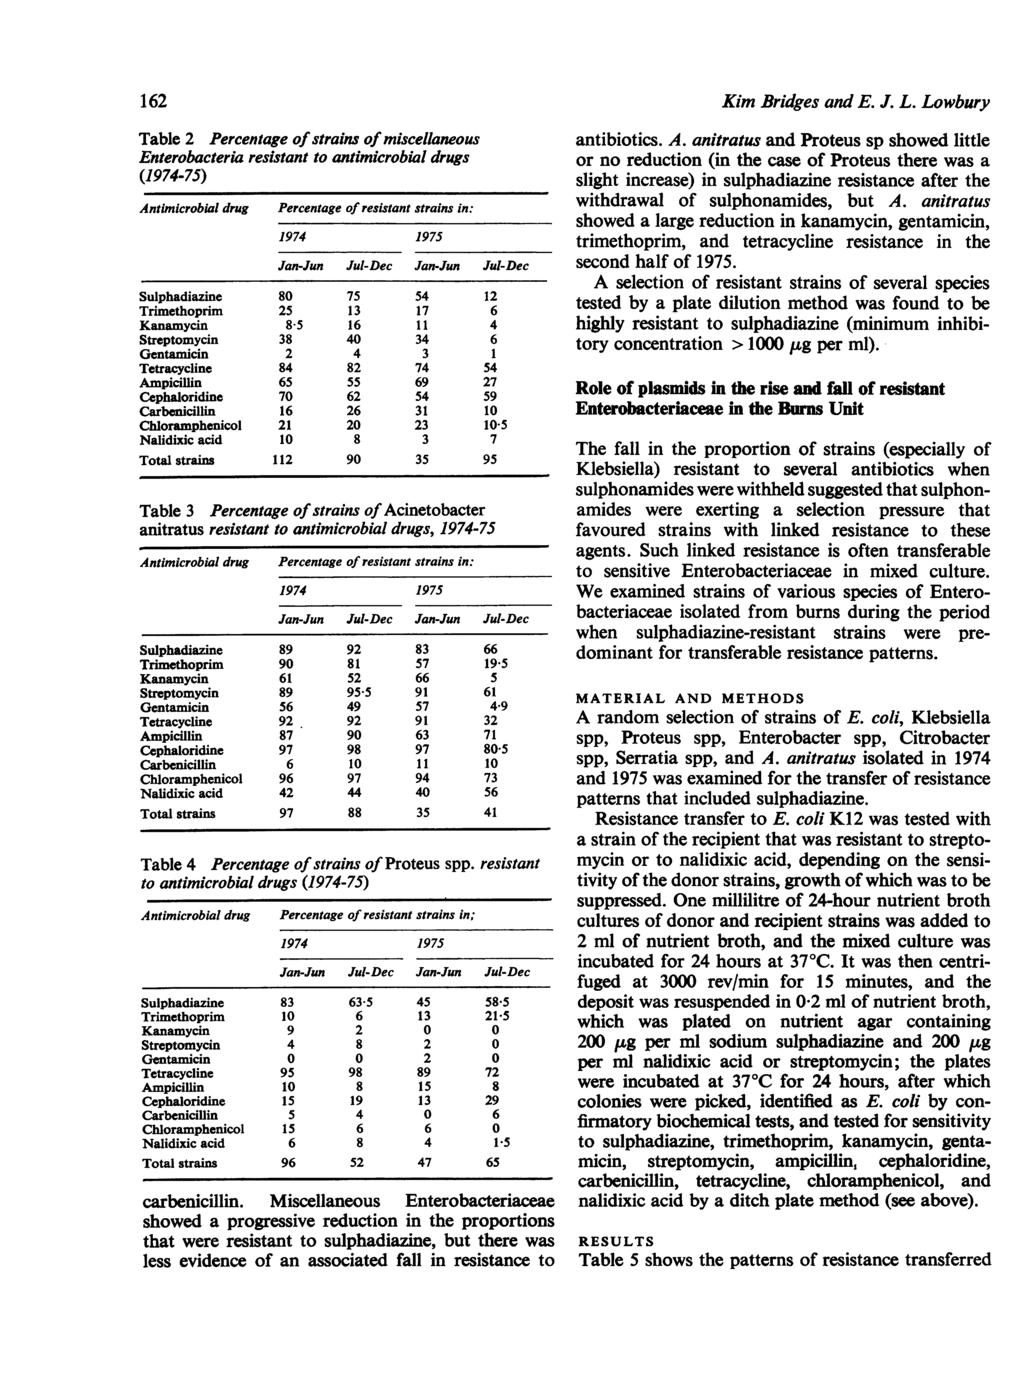 162 Table 2 Percentage of strains ofmiscellaneous Enterobacteria resistant to antimicrobial drugs (1974-75) Percentage of resistant strains in: Sulphadiazine 80 75 54 12 Trimethoprim 25 13 17 6